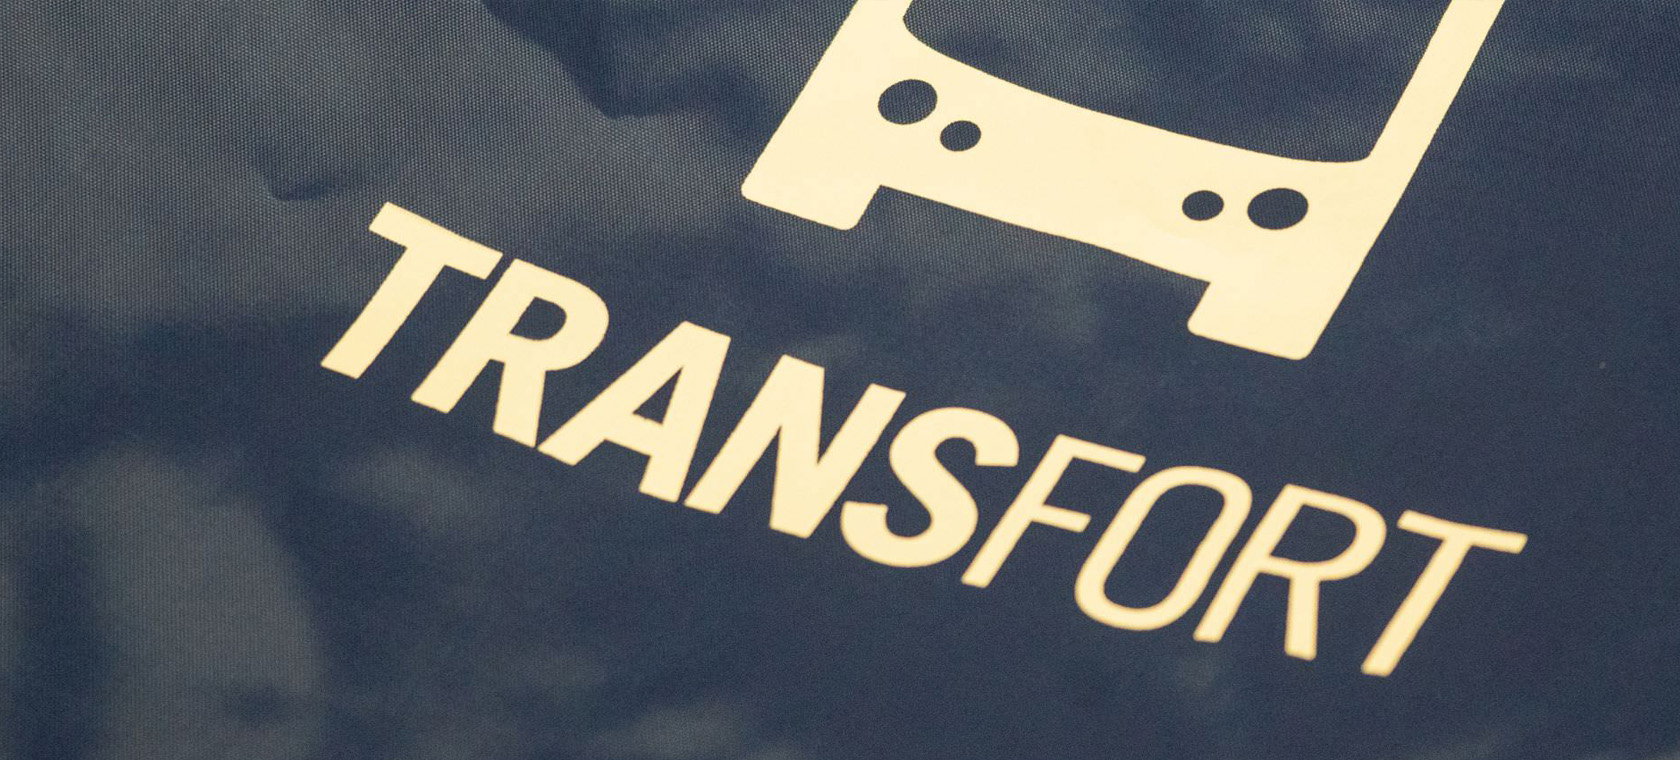 The Transfort logo on a printed brochure.